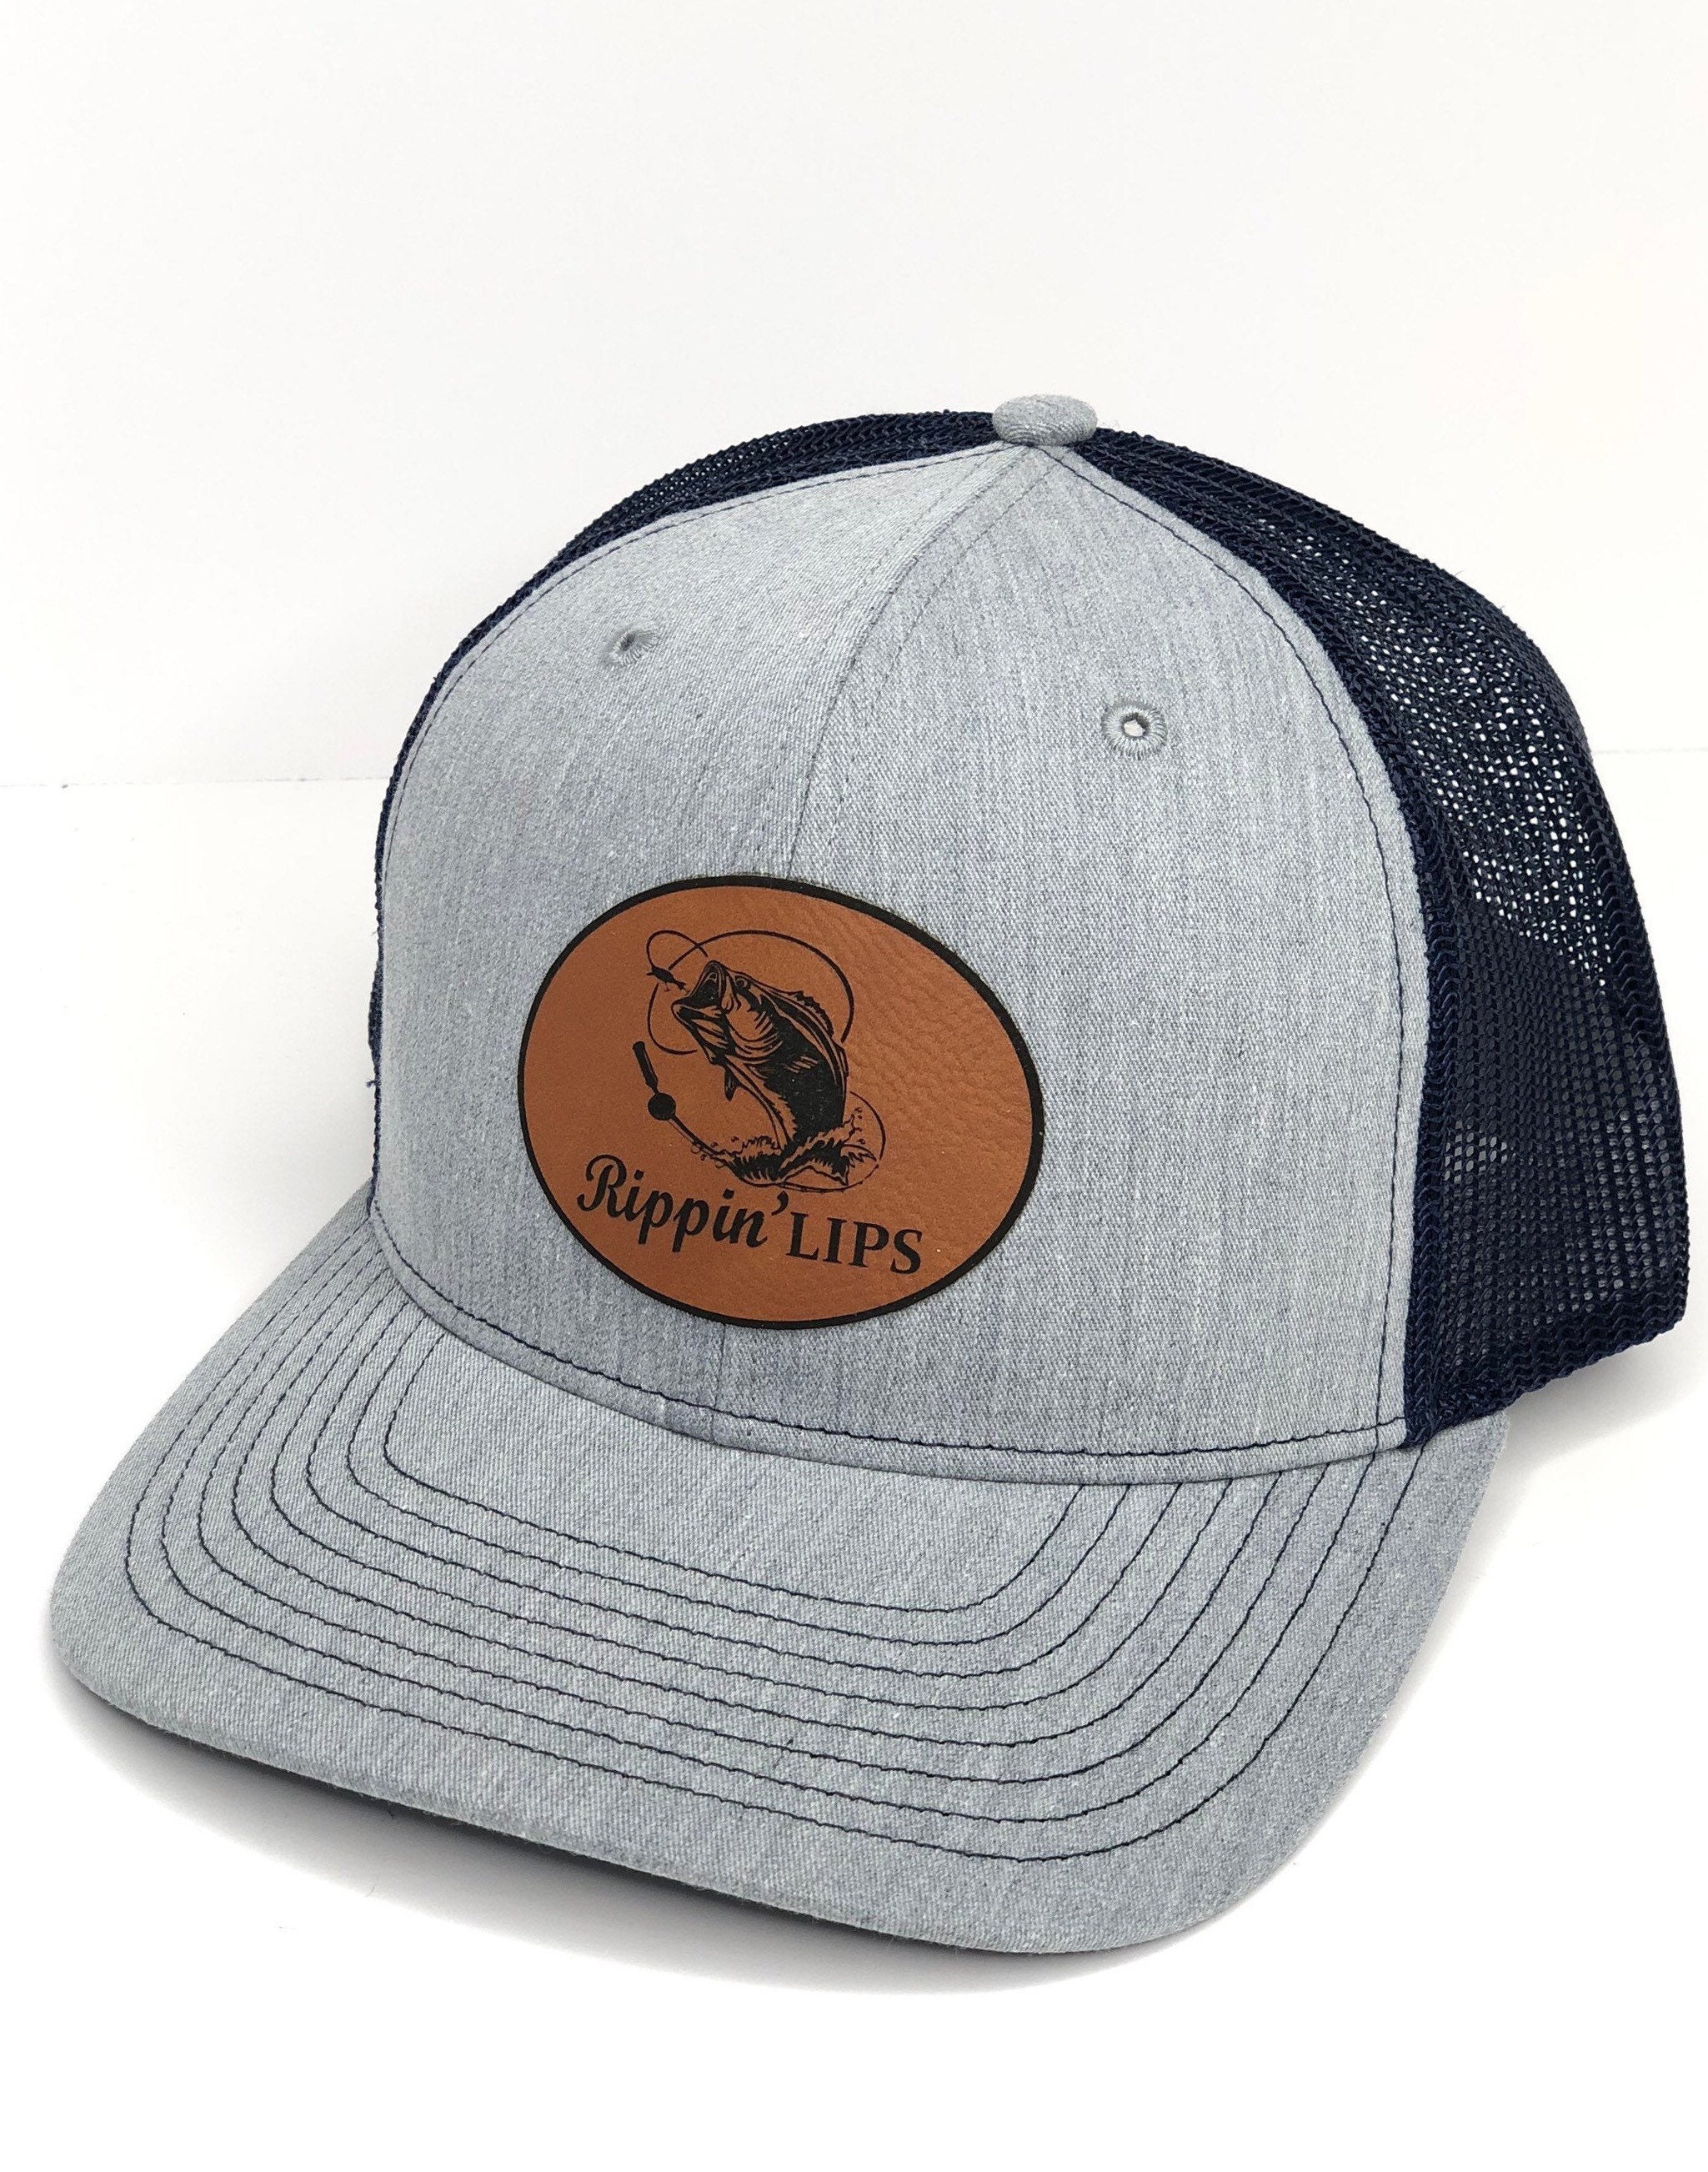 Bass Fishing Hat, Hat , Cap, Leather Engraved, Leather Patch Hat, Fishing  Hat, Ripping Lips Hat 